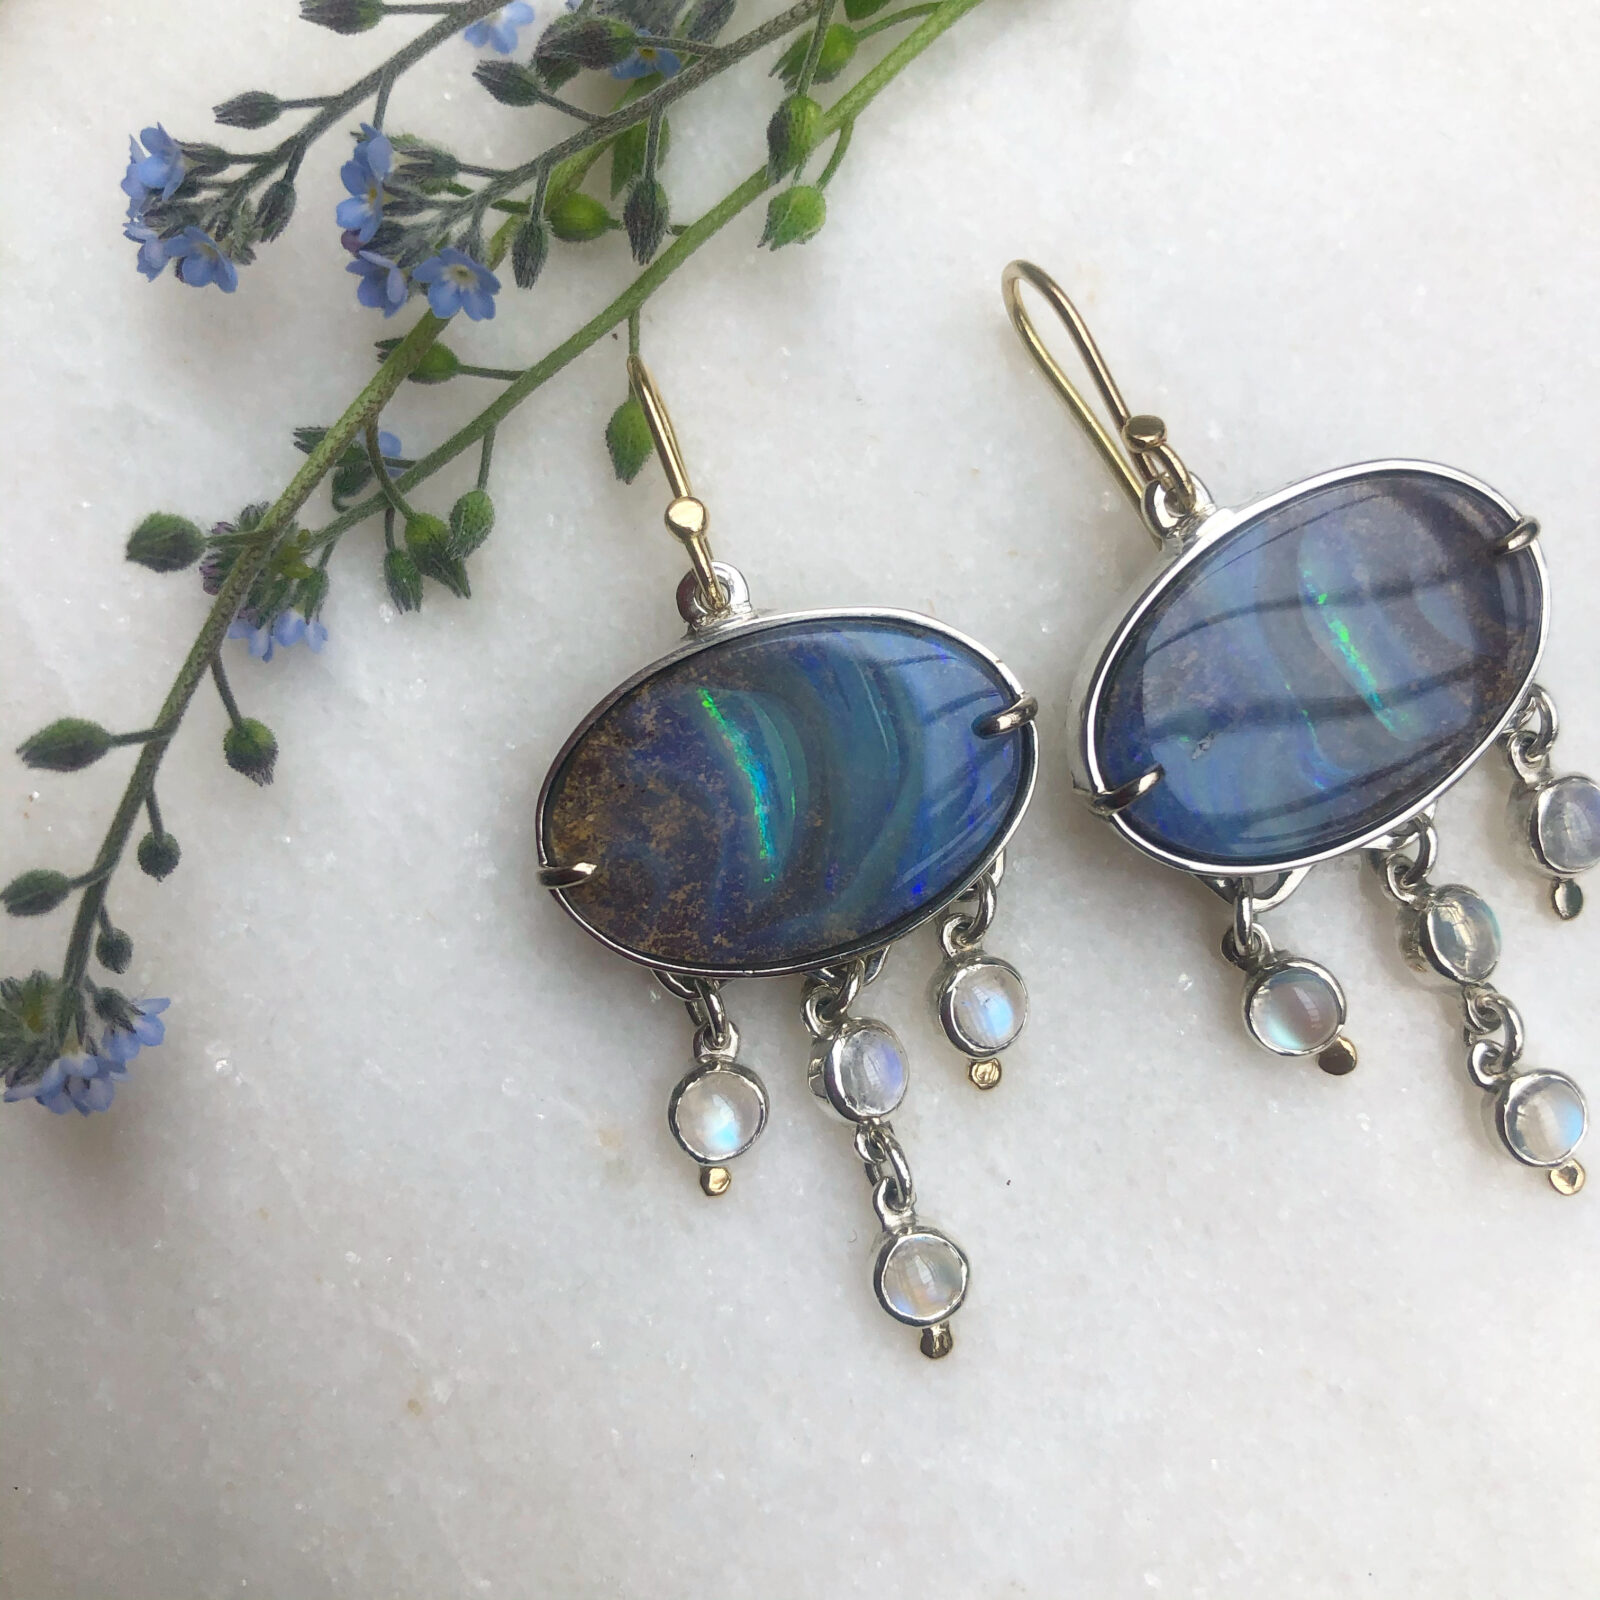 Large blue boulder opal earrings with blue moonstone drops